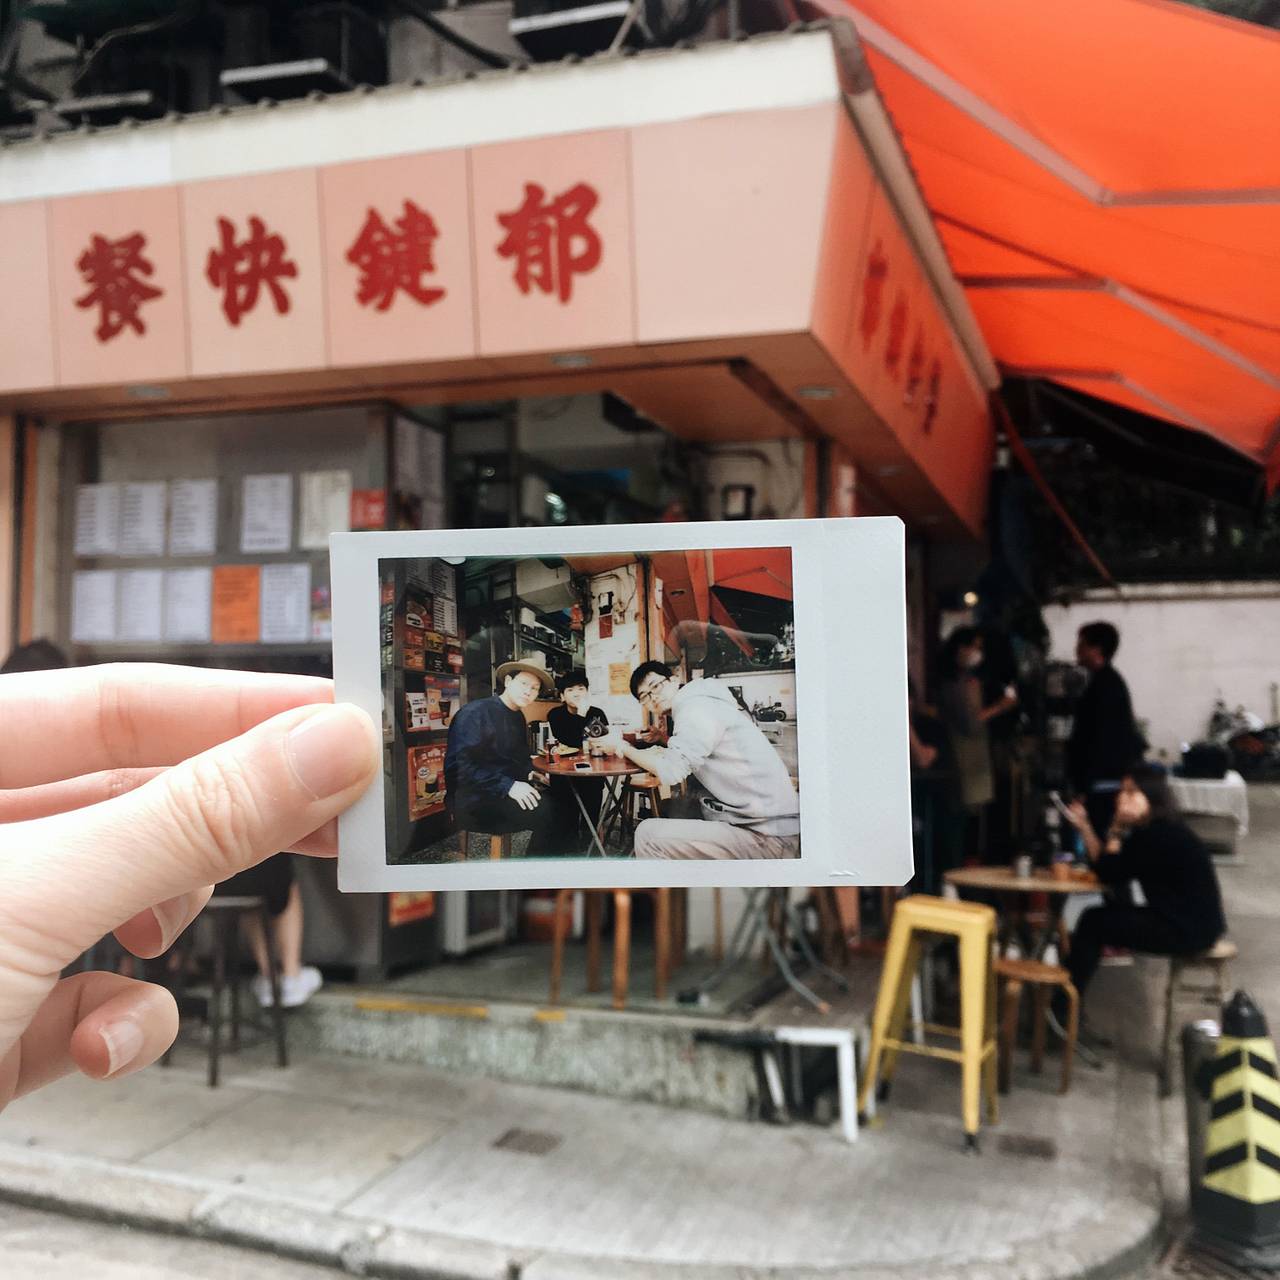 Hold the magic of instant photography in your hands within seconds. Nothing beats a bit of instant photographic gratification – no labs or development required!